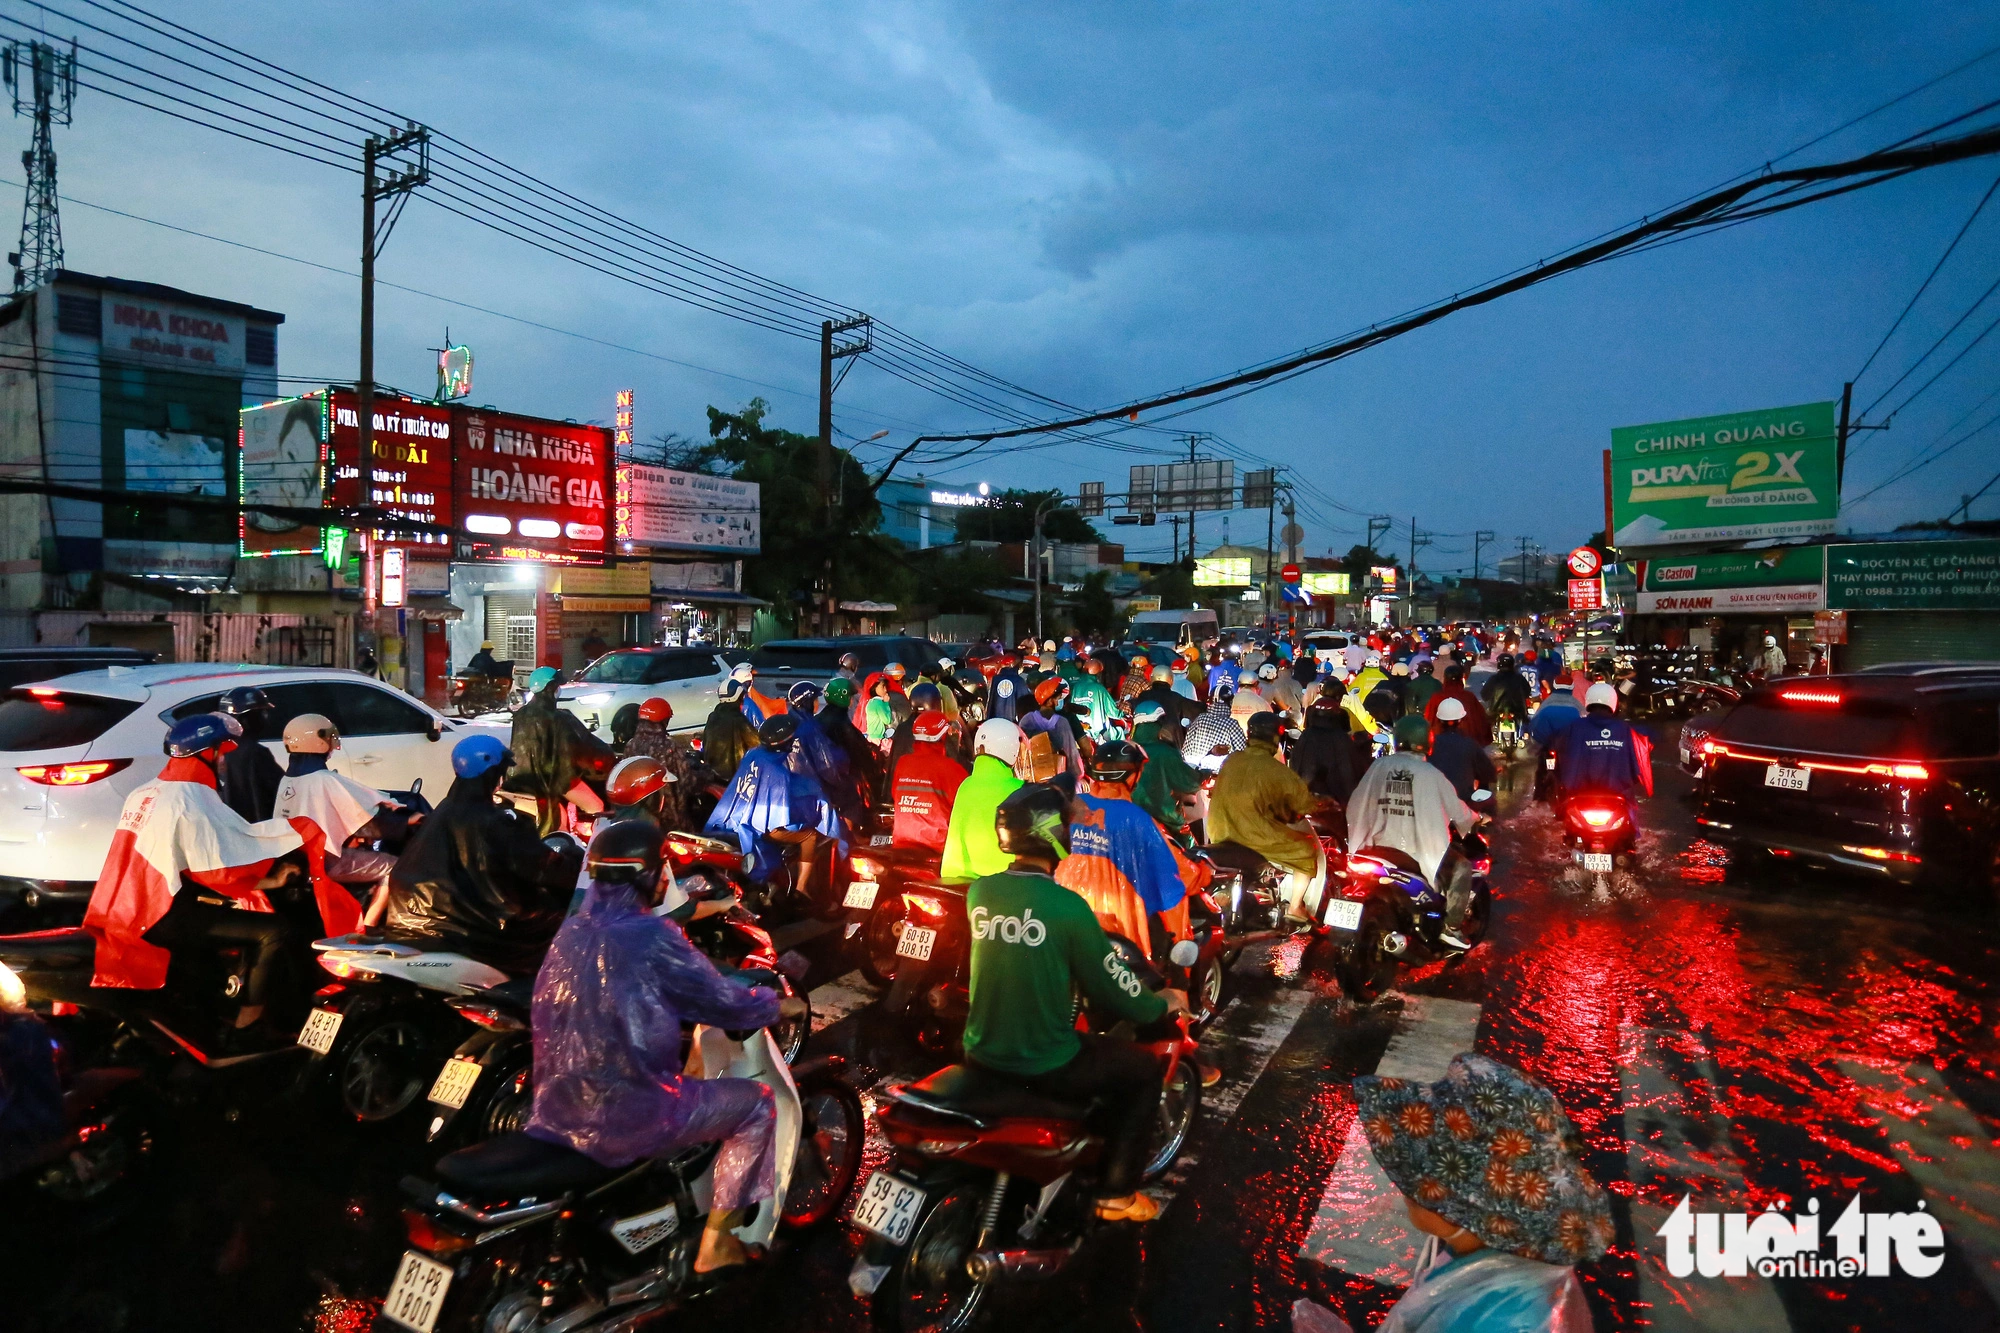 Scores of vehicles encounter traffic gridlock as some commuters run a red light at an intersection between Hiep Binh Street and National Highway 13 in Ho Chi Minh City on July 5, 2023. Photo: Chau Tuan / Tuoi Tre